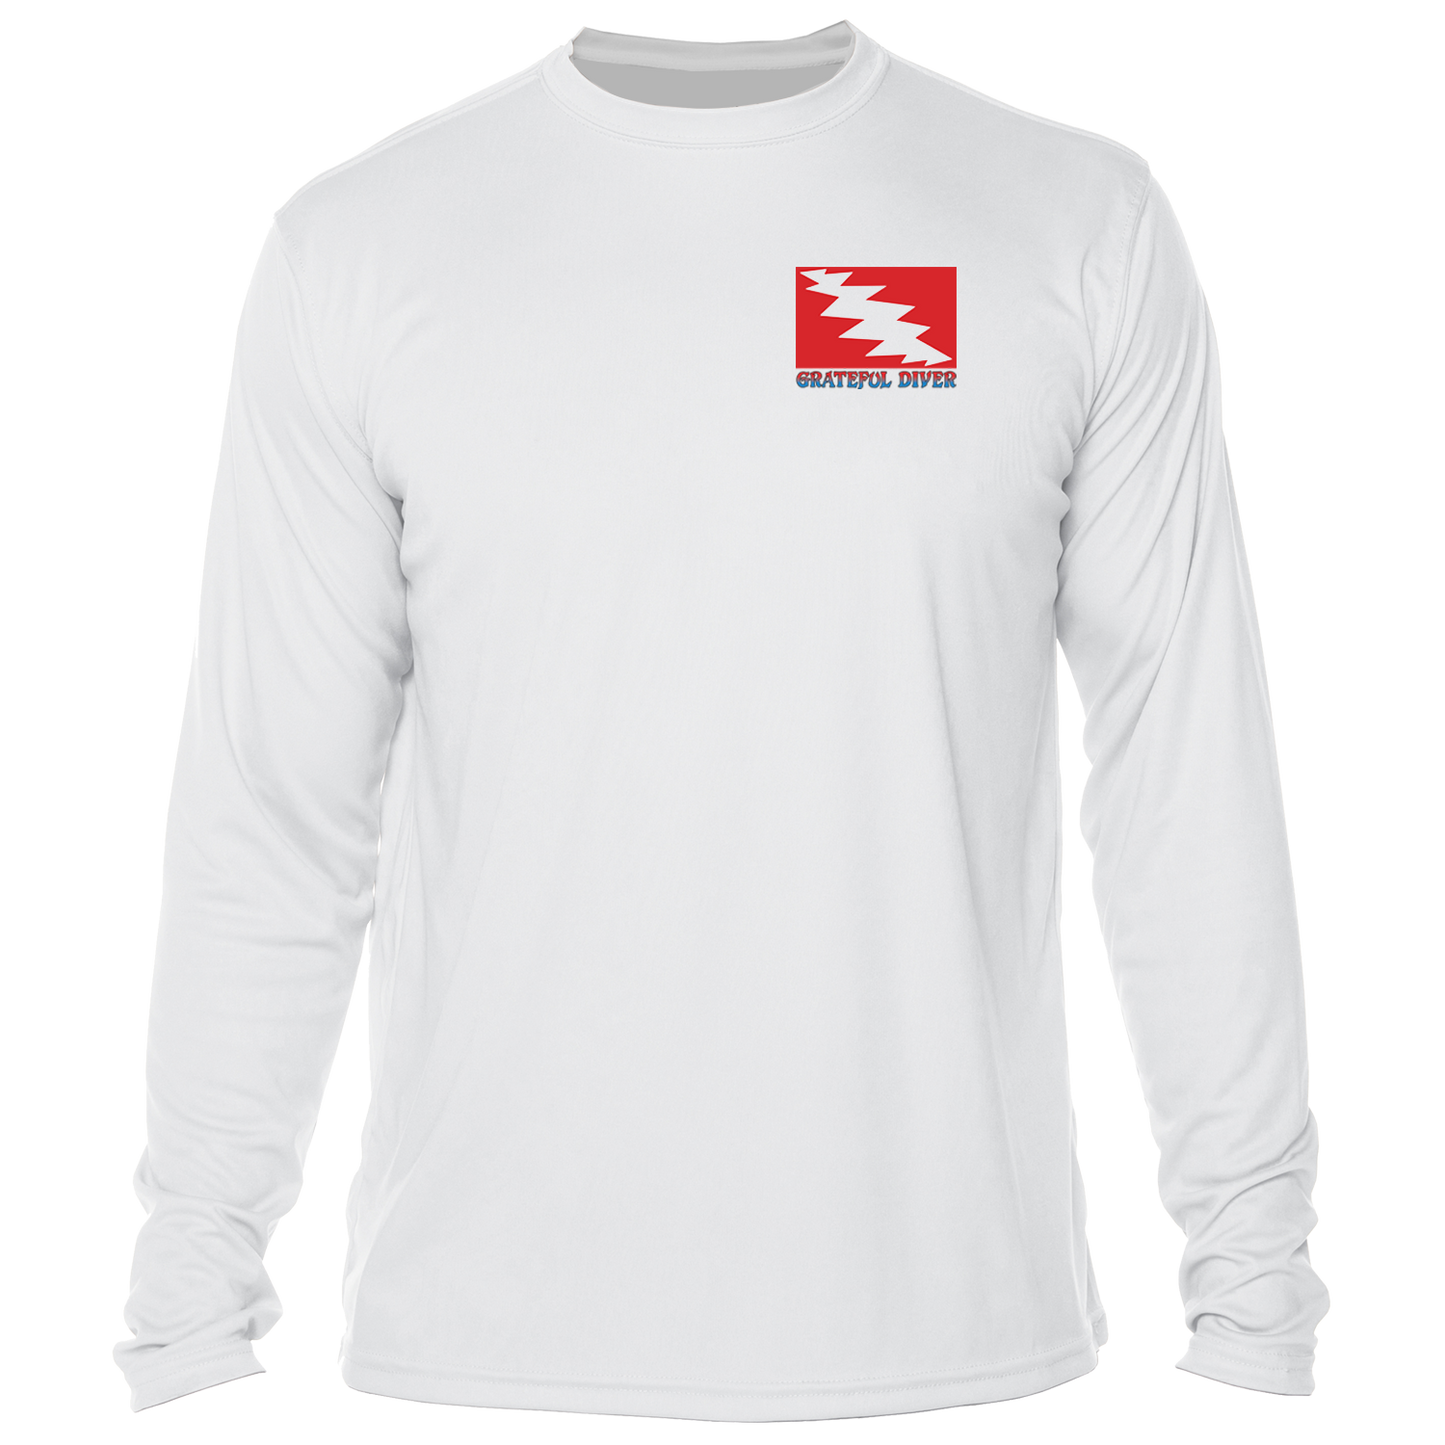 Grateful Diver Ship of Fools UV Shirt in white showing the front diver flag logo